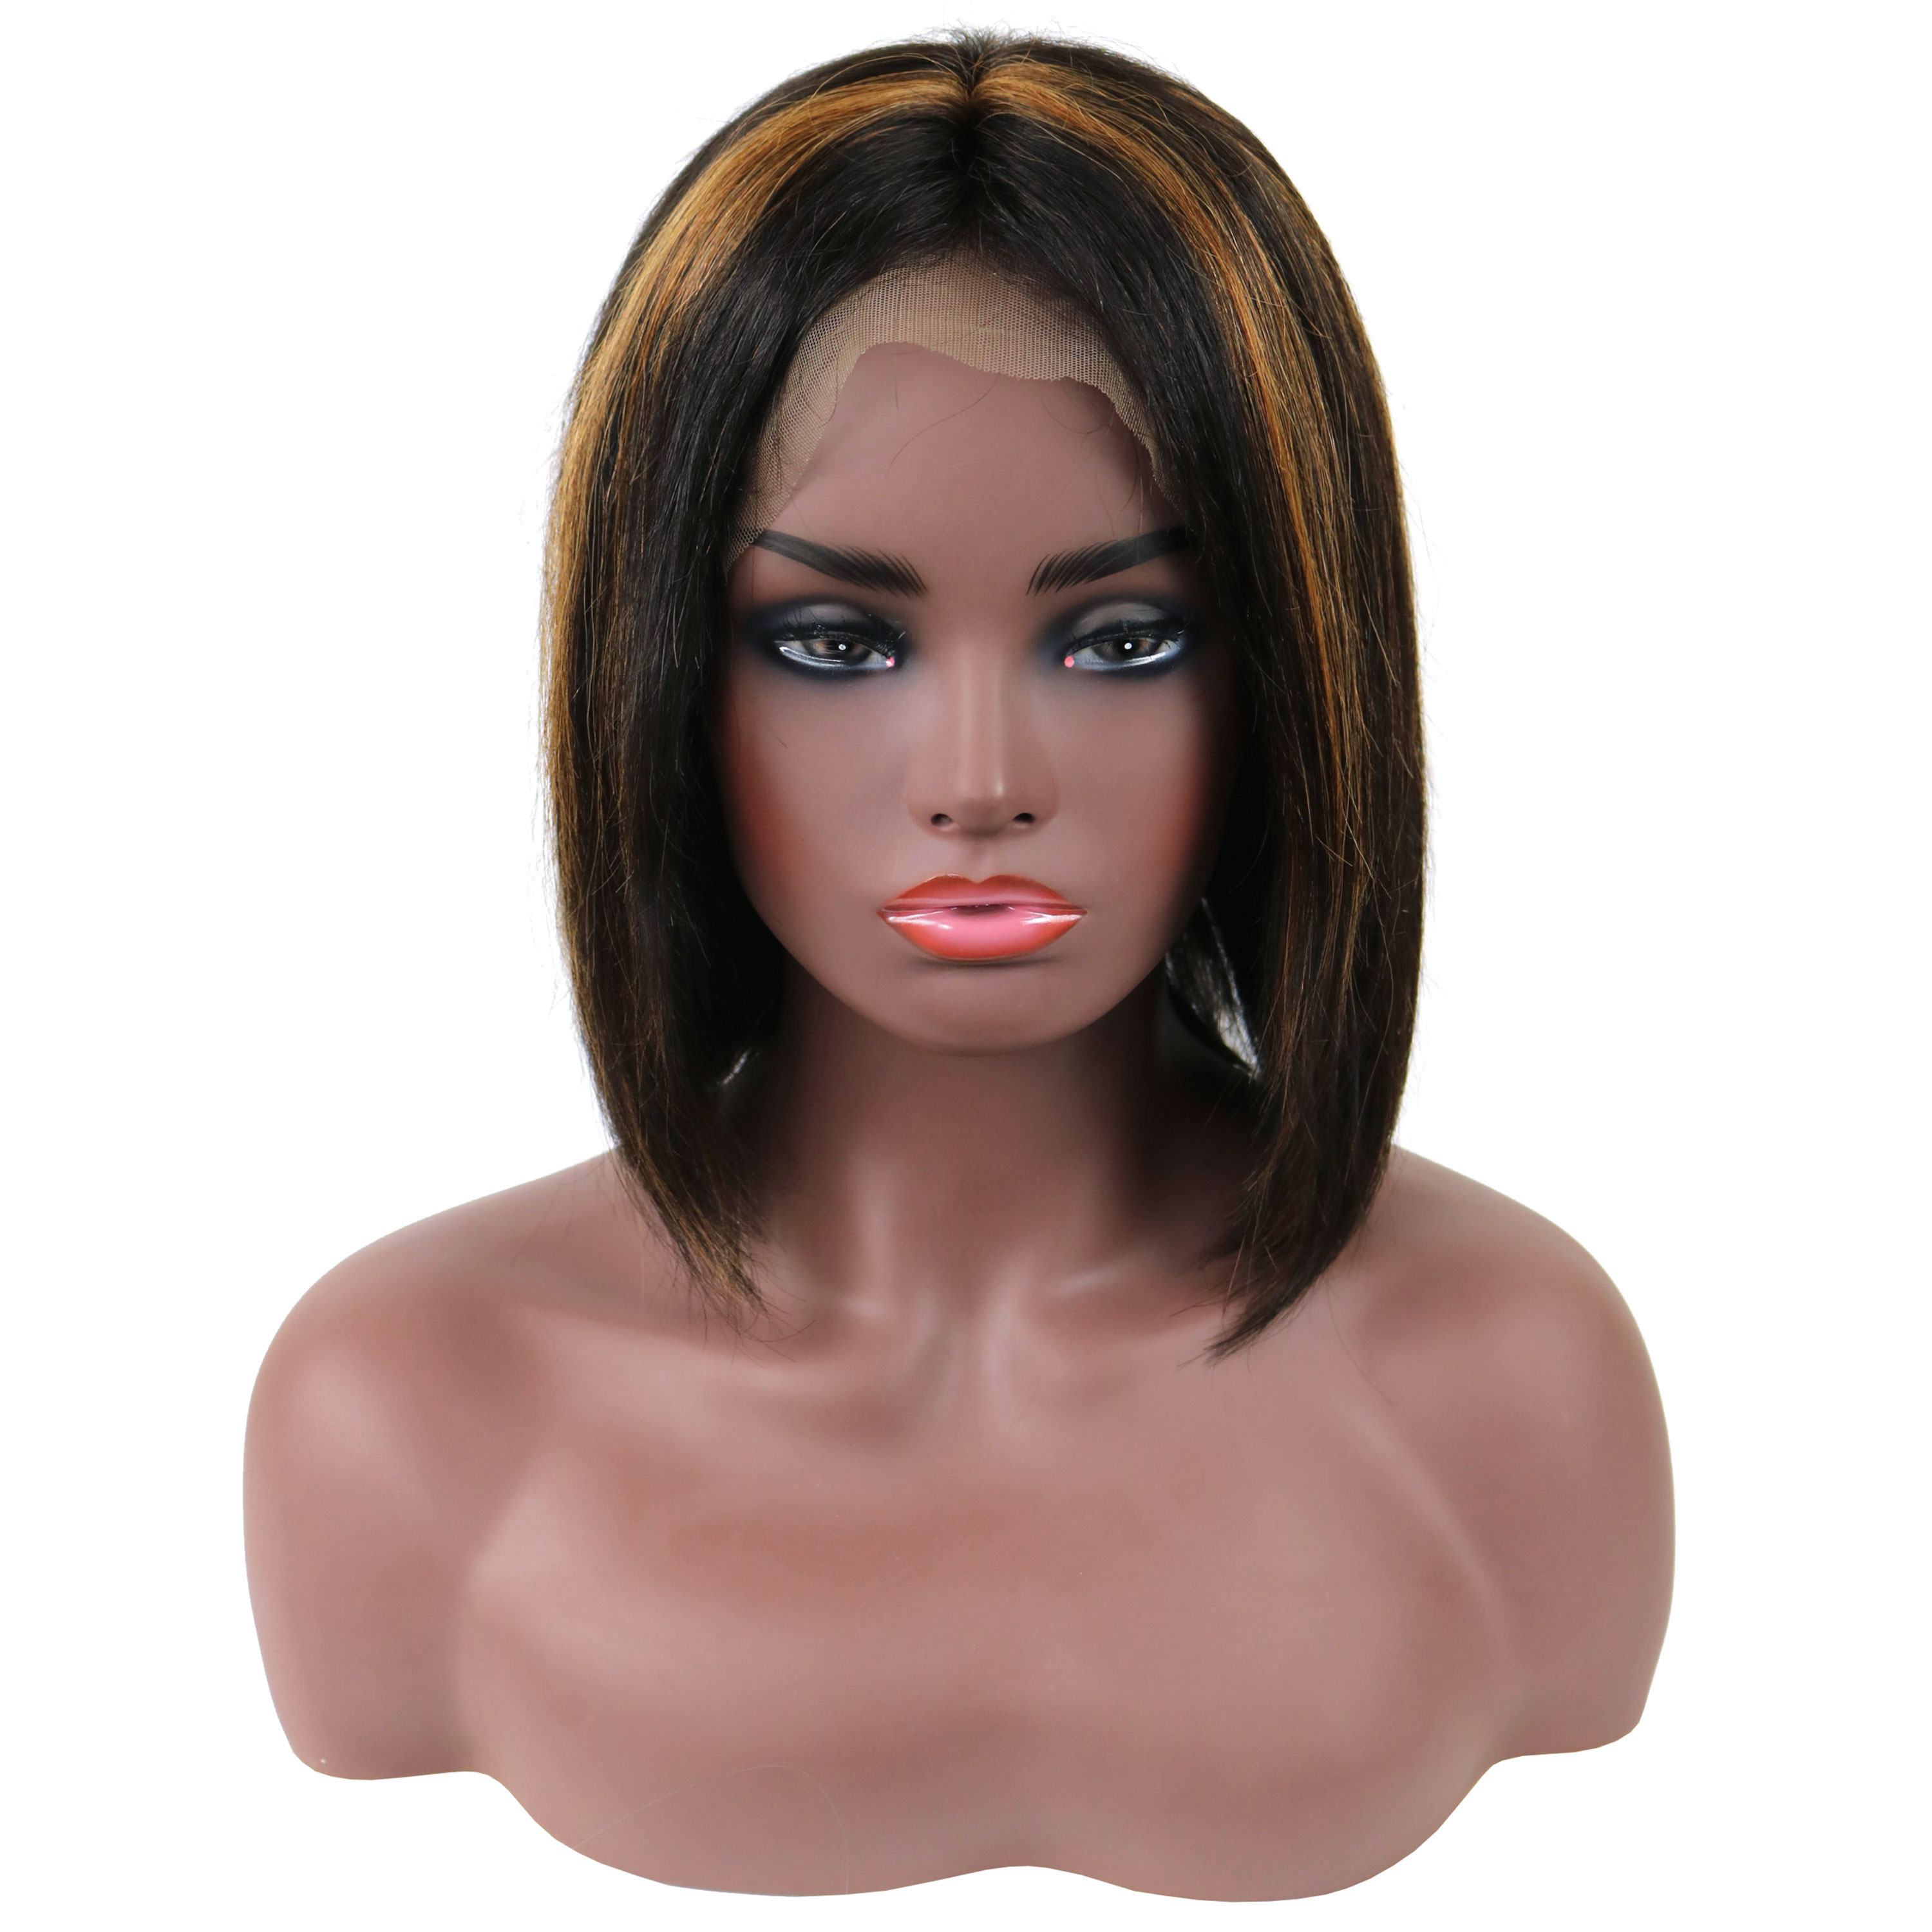 Gabrielle Union Medium Straight Lace Front Human Hair Wig 14 Inches